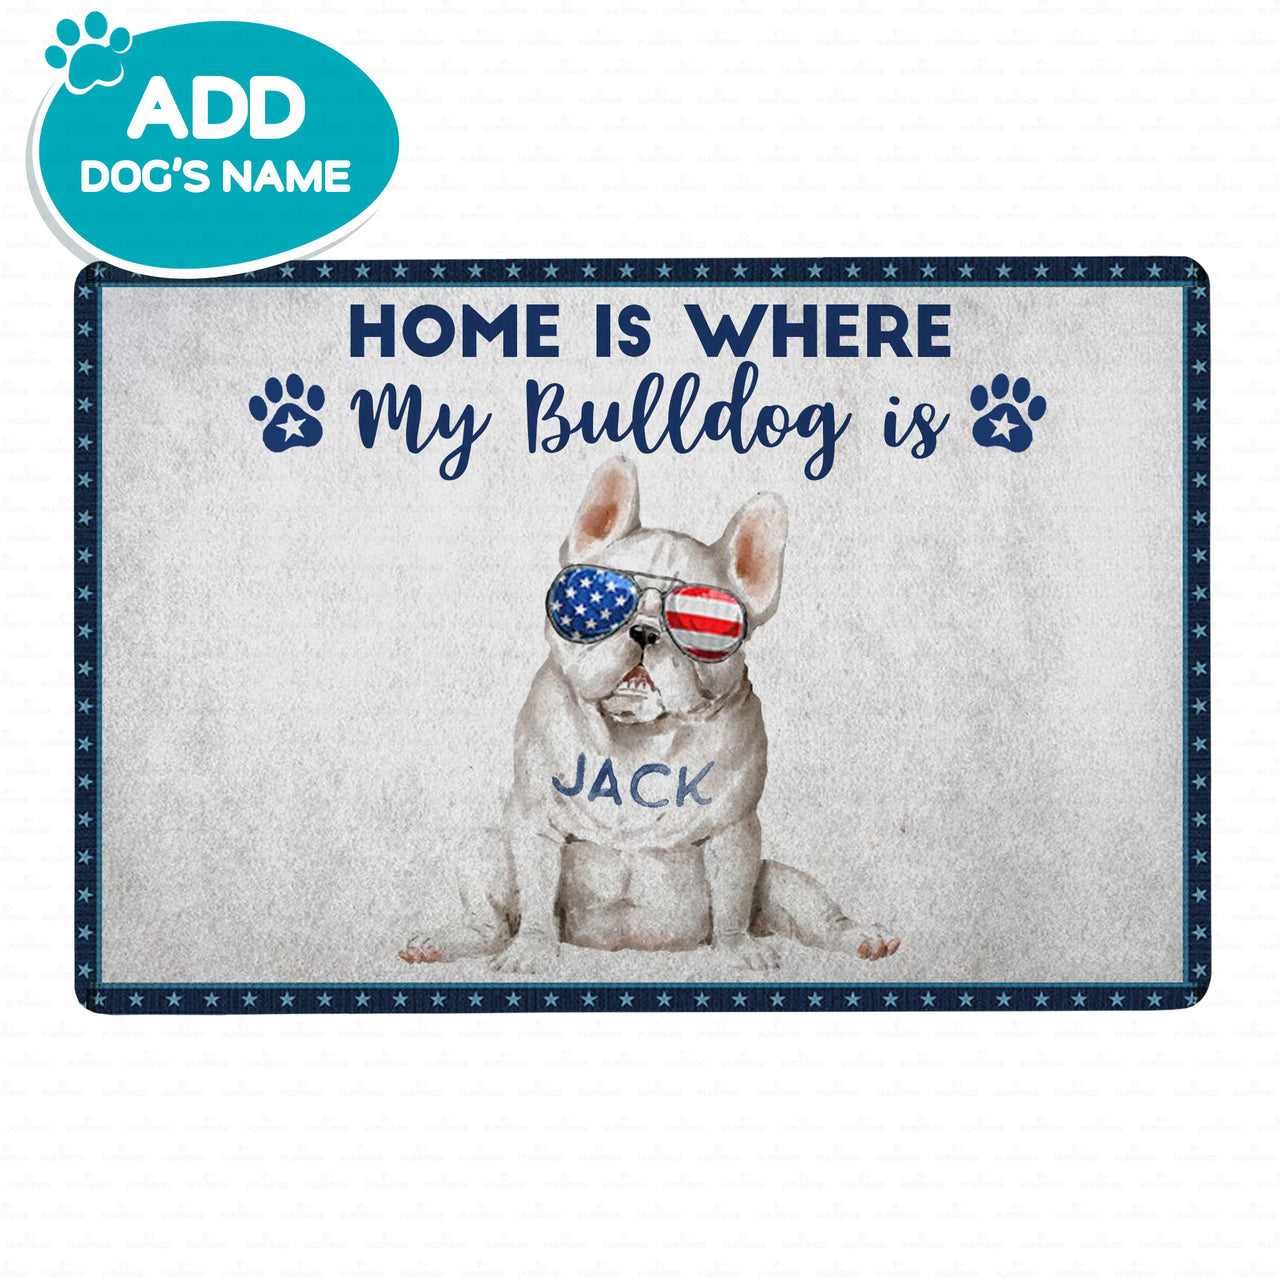 Personalized Dog Gift - Home Is Where My Bulldog Is For Dog Lovers - Doormat